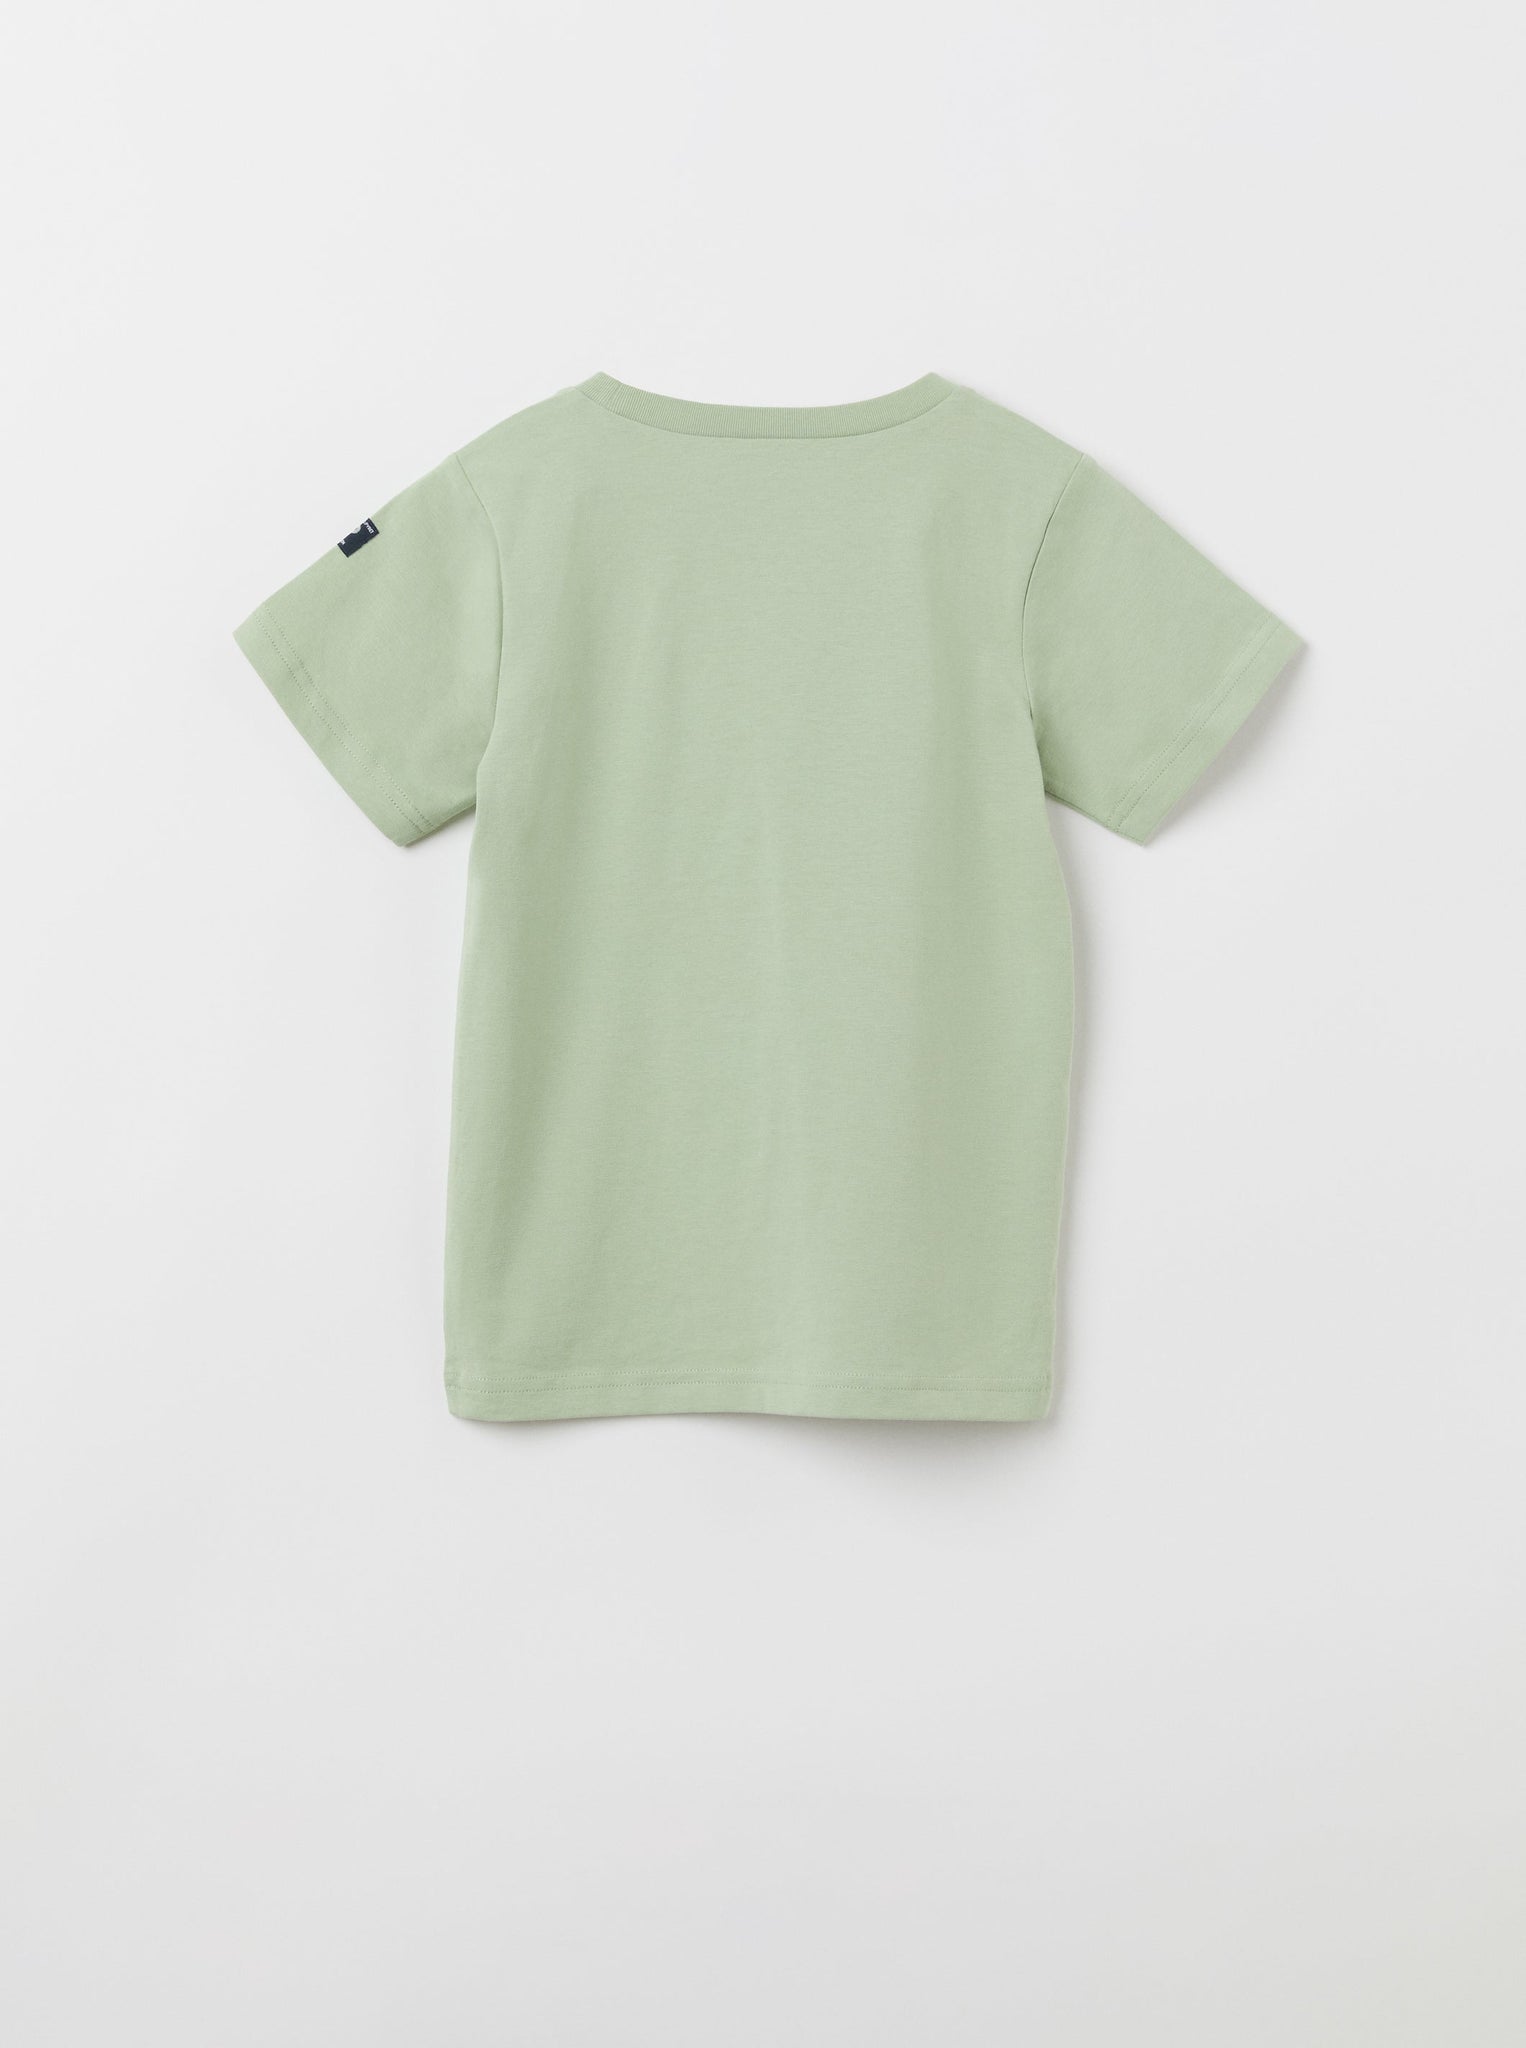 Organic Cotton Cat Print Kids T-Shirt from the Polarn O. Pyret kidswear collection. The best ethical kids clothes